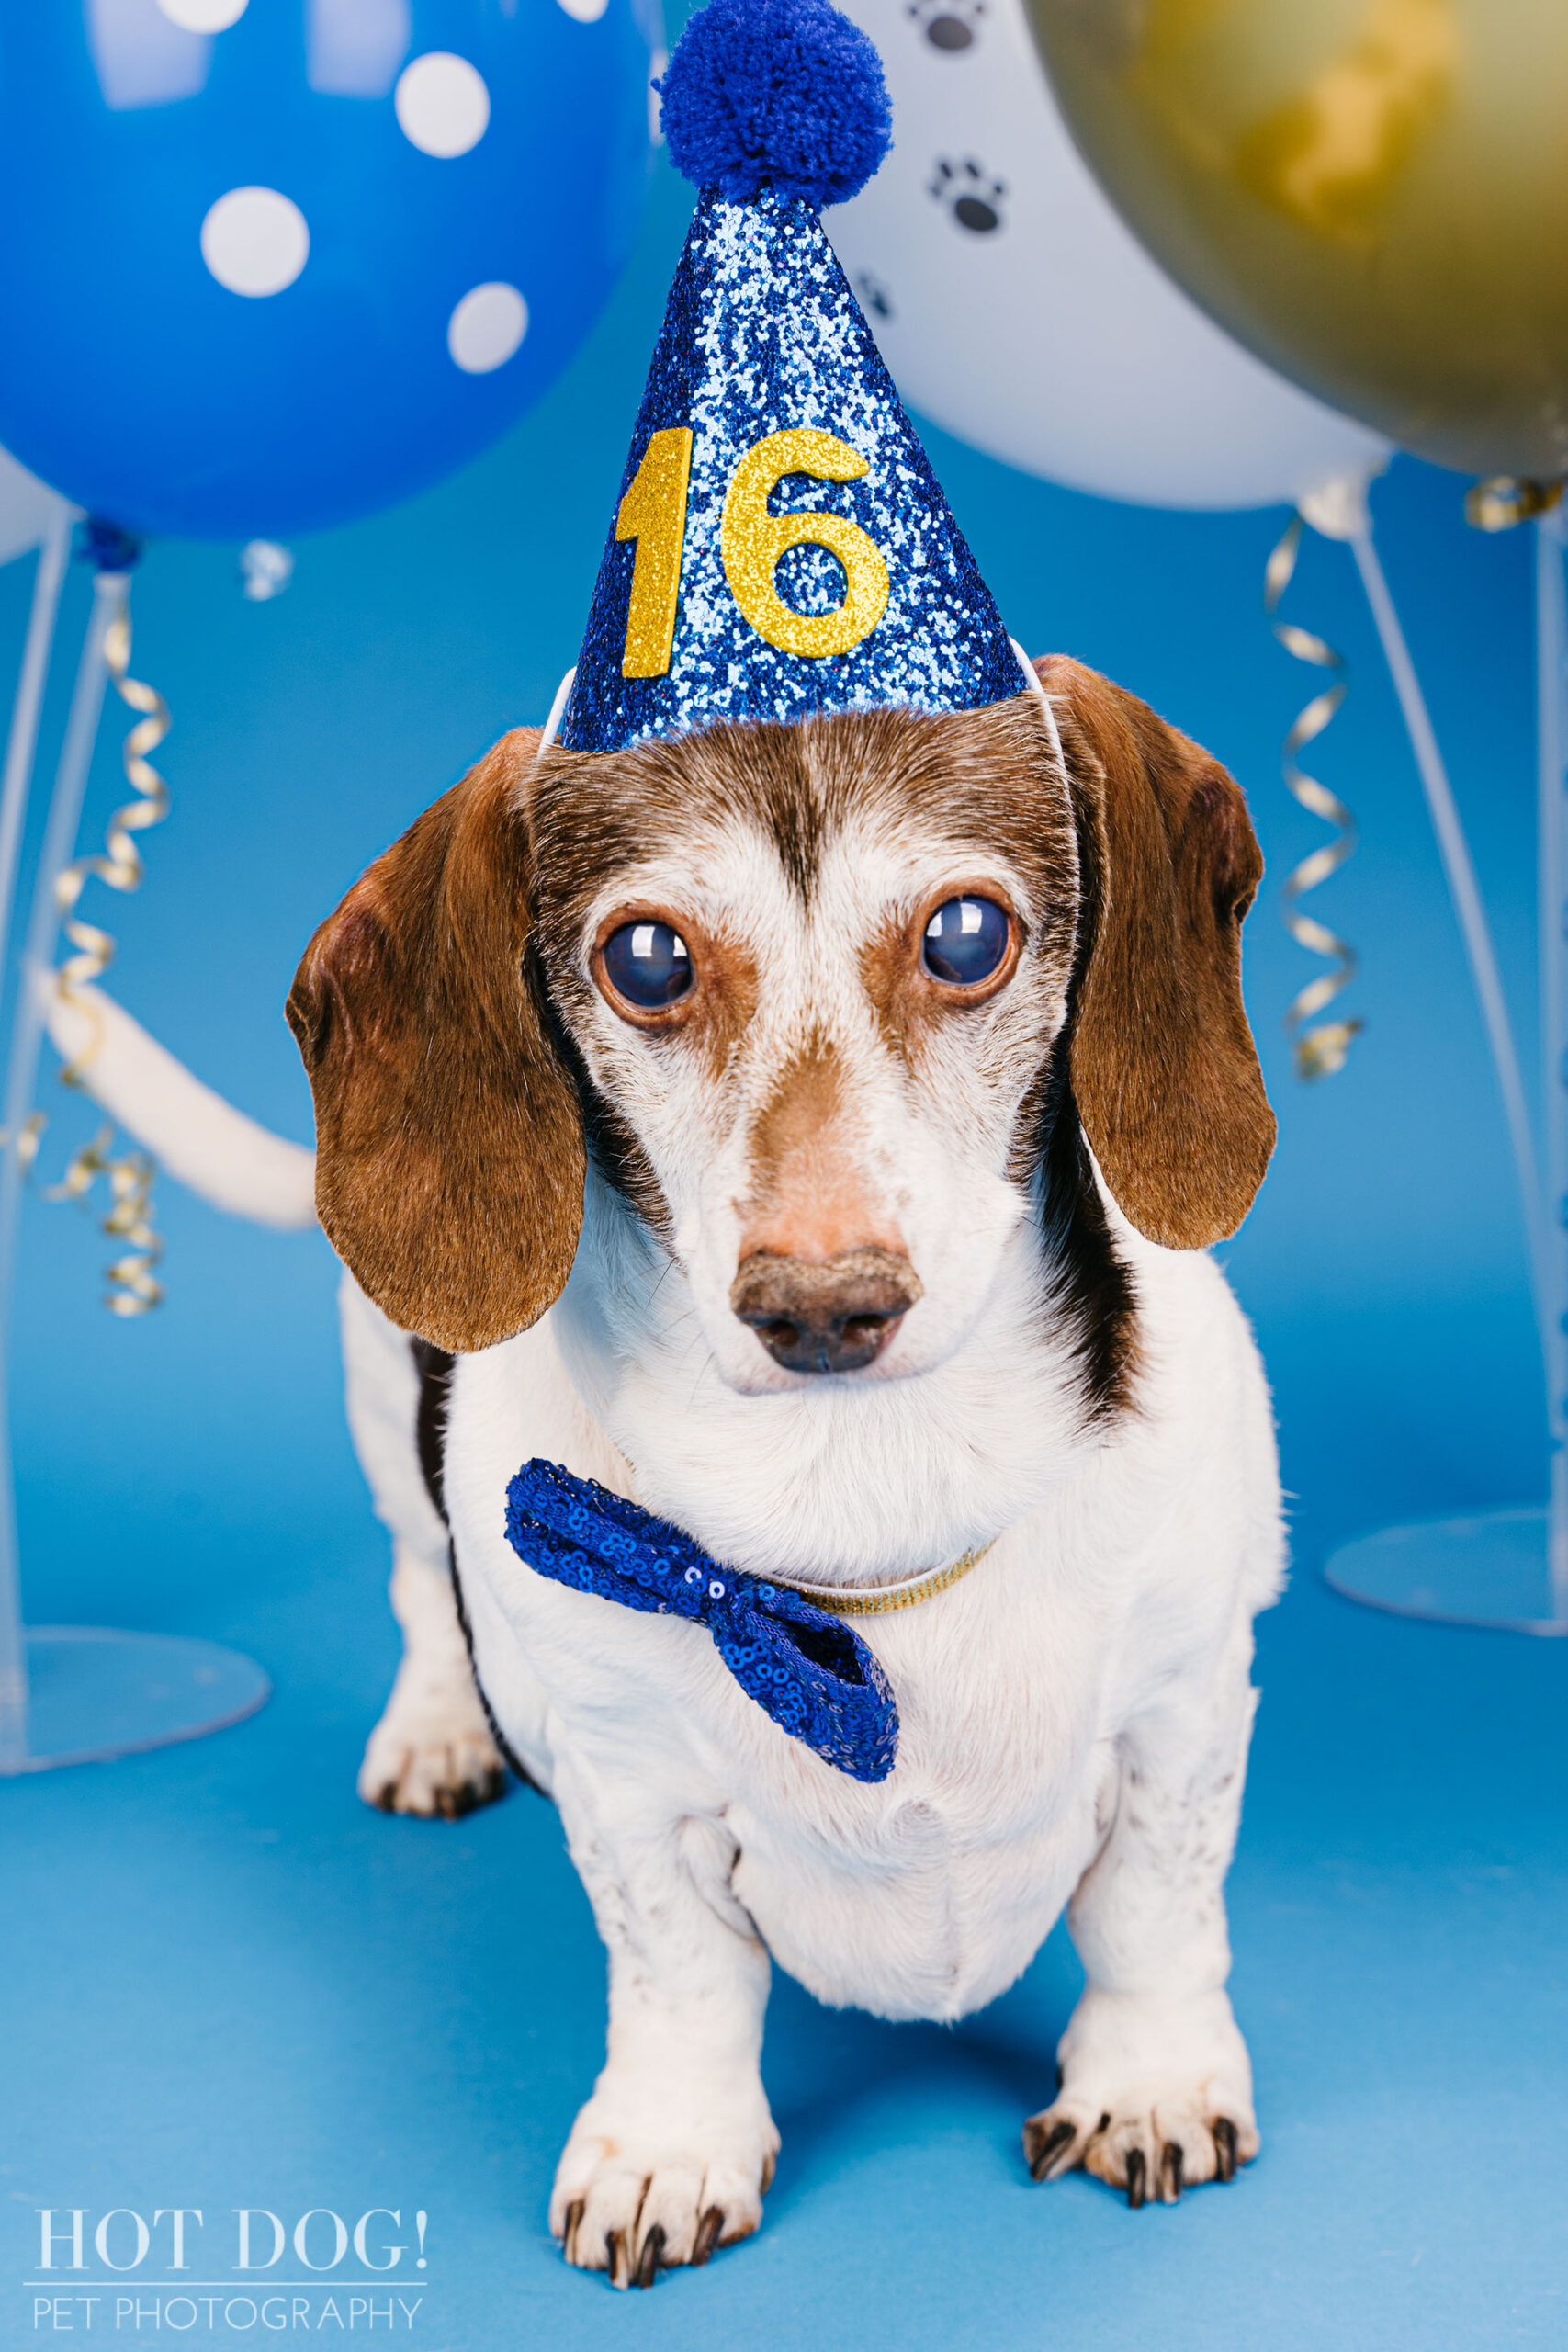 Dog 16th birthday photo by Hot Dog! Pet Photography in Central Florida